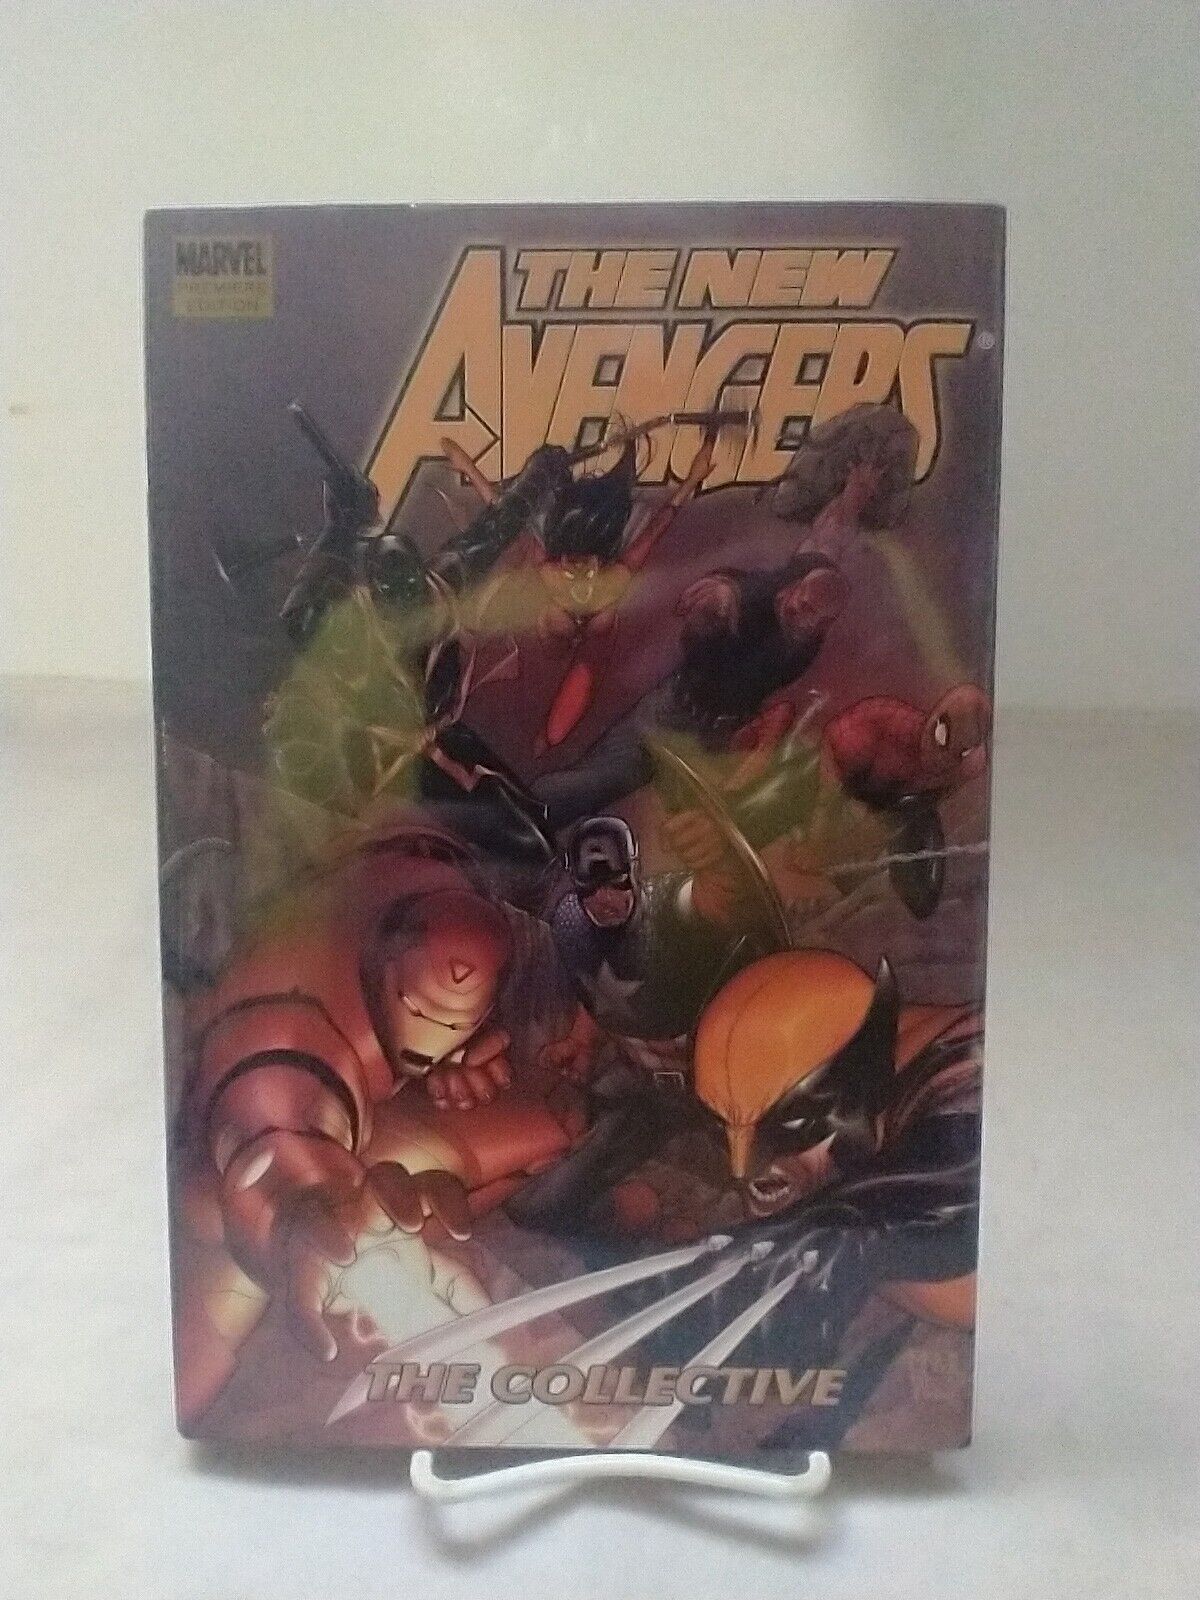 Marvel Comics New Avengers Volume 4 The Collective Hardcover Used